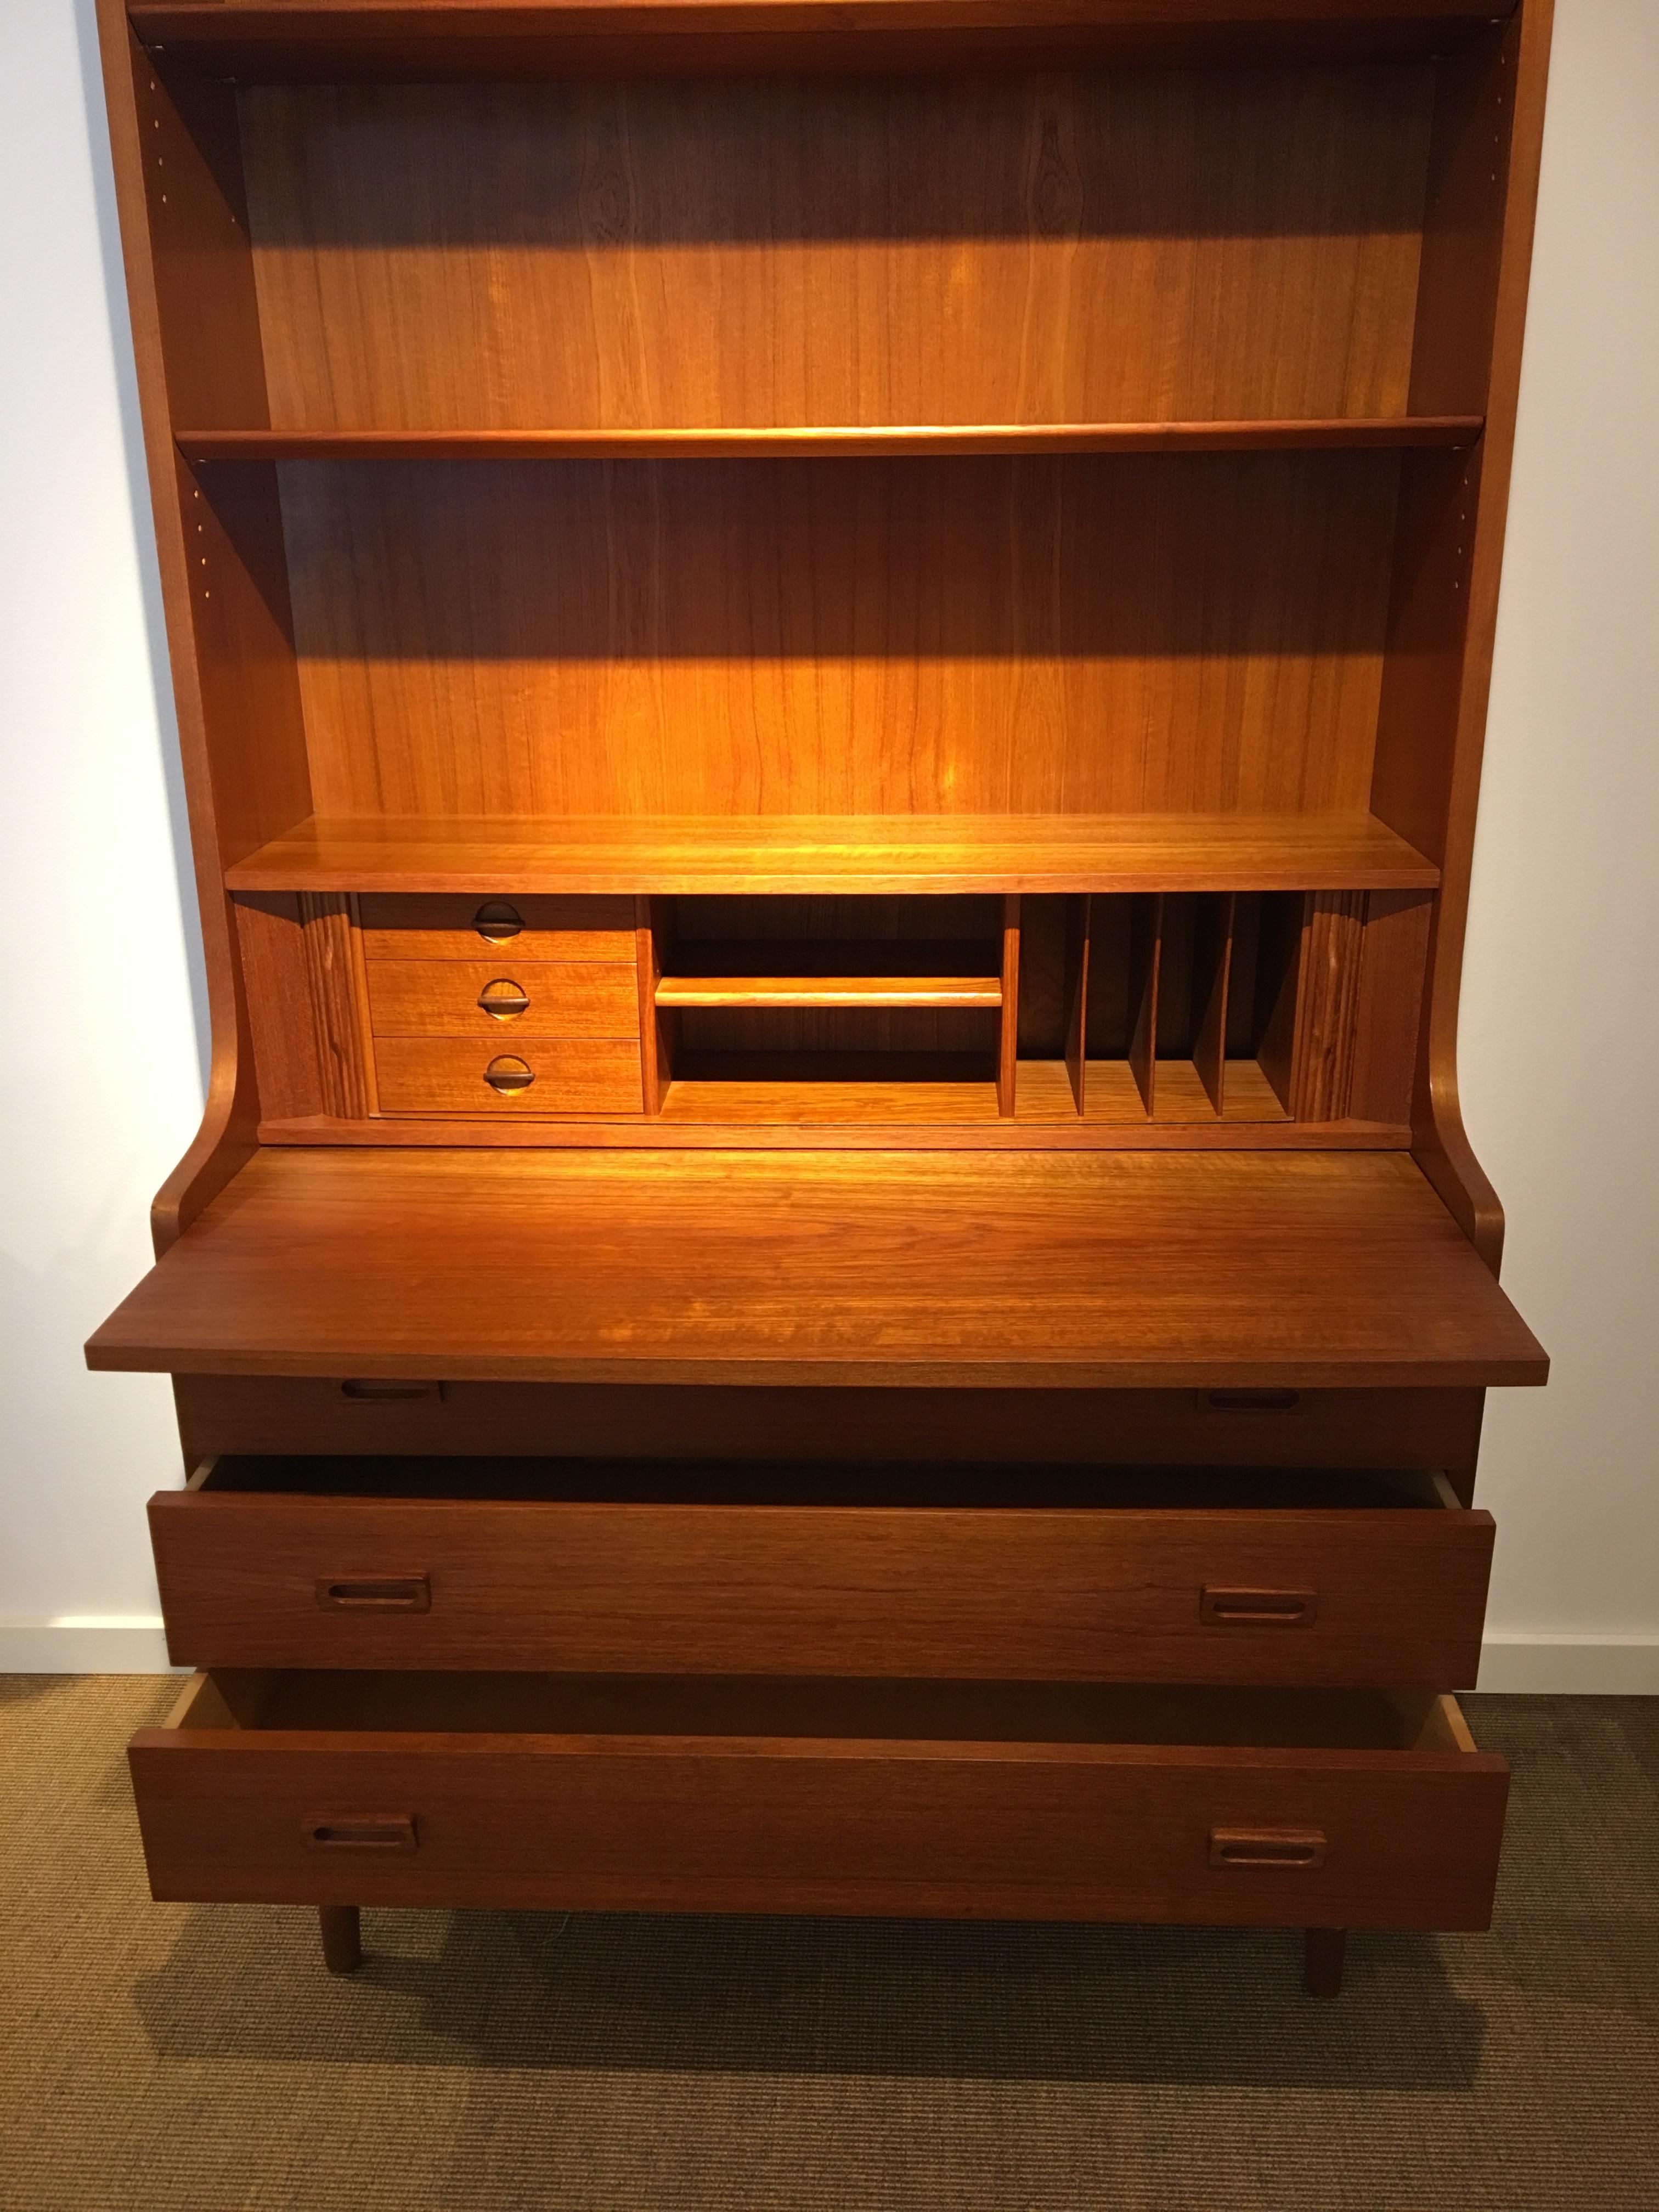 Midcentury Danish teak cabinet by Johannes Sorth, 1960s.
Nexø teak shelf in veneer. Design: Johannes Sorth. The lower part has 3 drawers, where the top drawer is divided. Extension plate over drawers and small louvre cover with 3 small drawers a